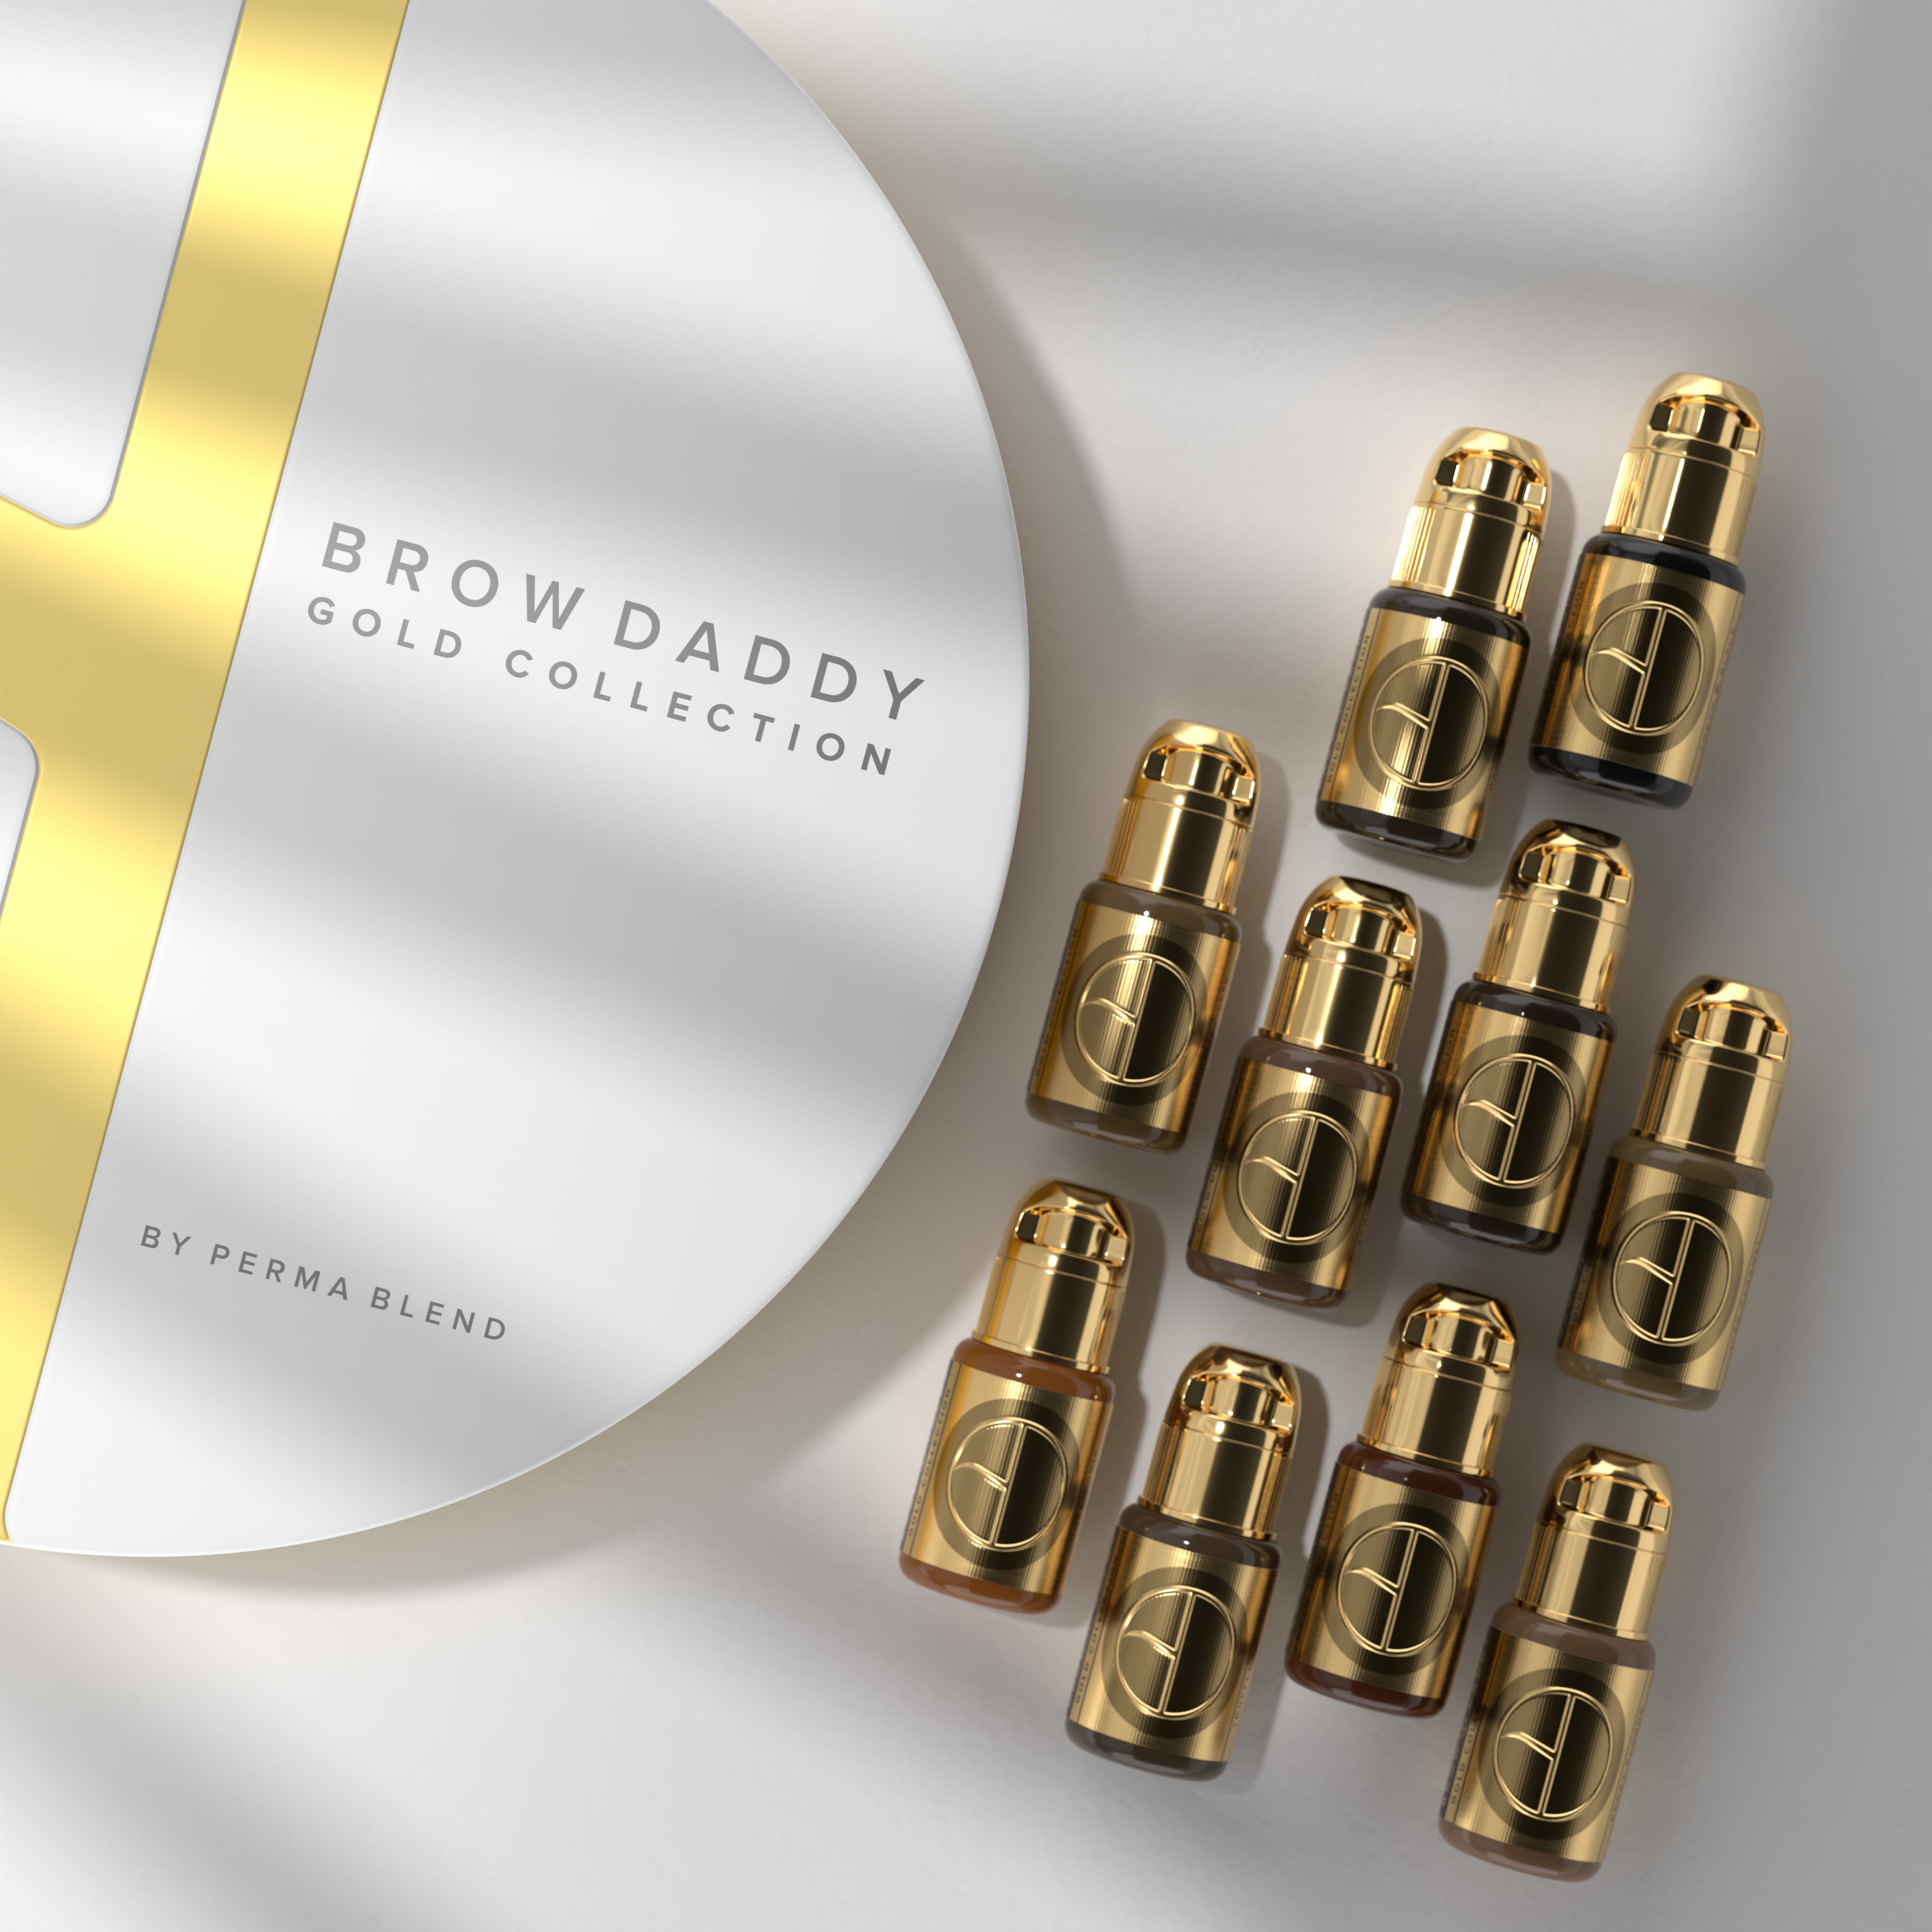 Brow Daddy Pigments, Brow Daddy Gold Collection, Brow Daddy Cleo PMU Pen, Brow Daddy Permanent Makeup products, Genie Needle Cartridges, Microblades